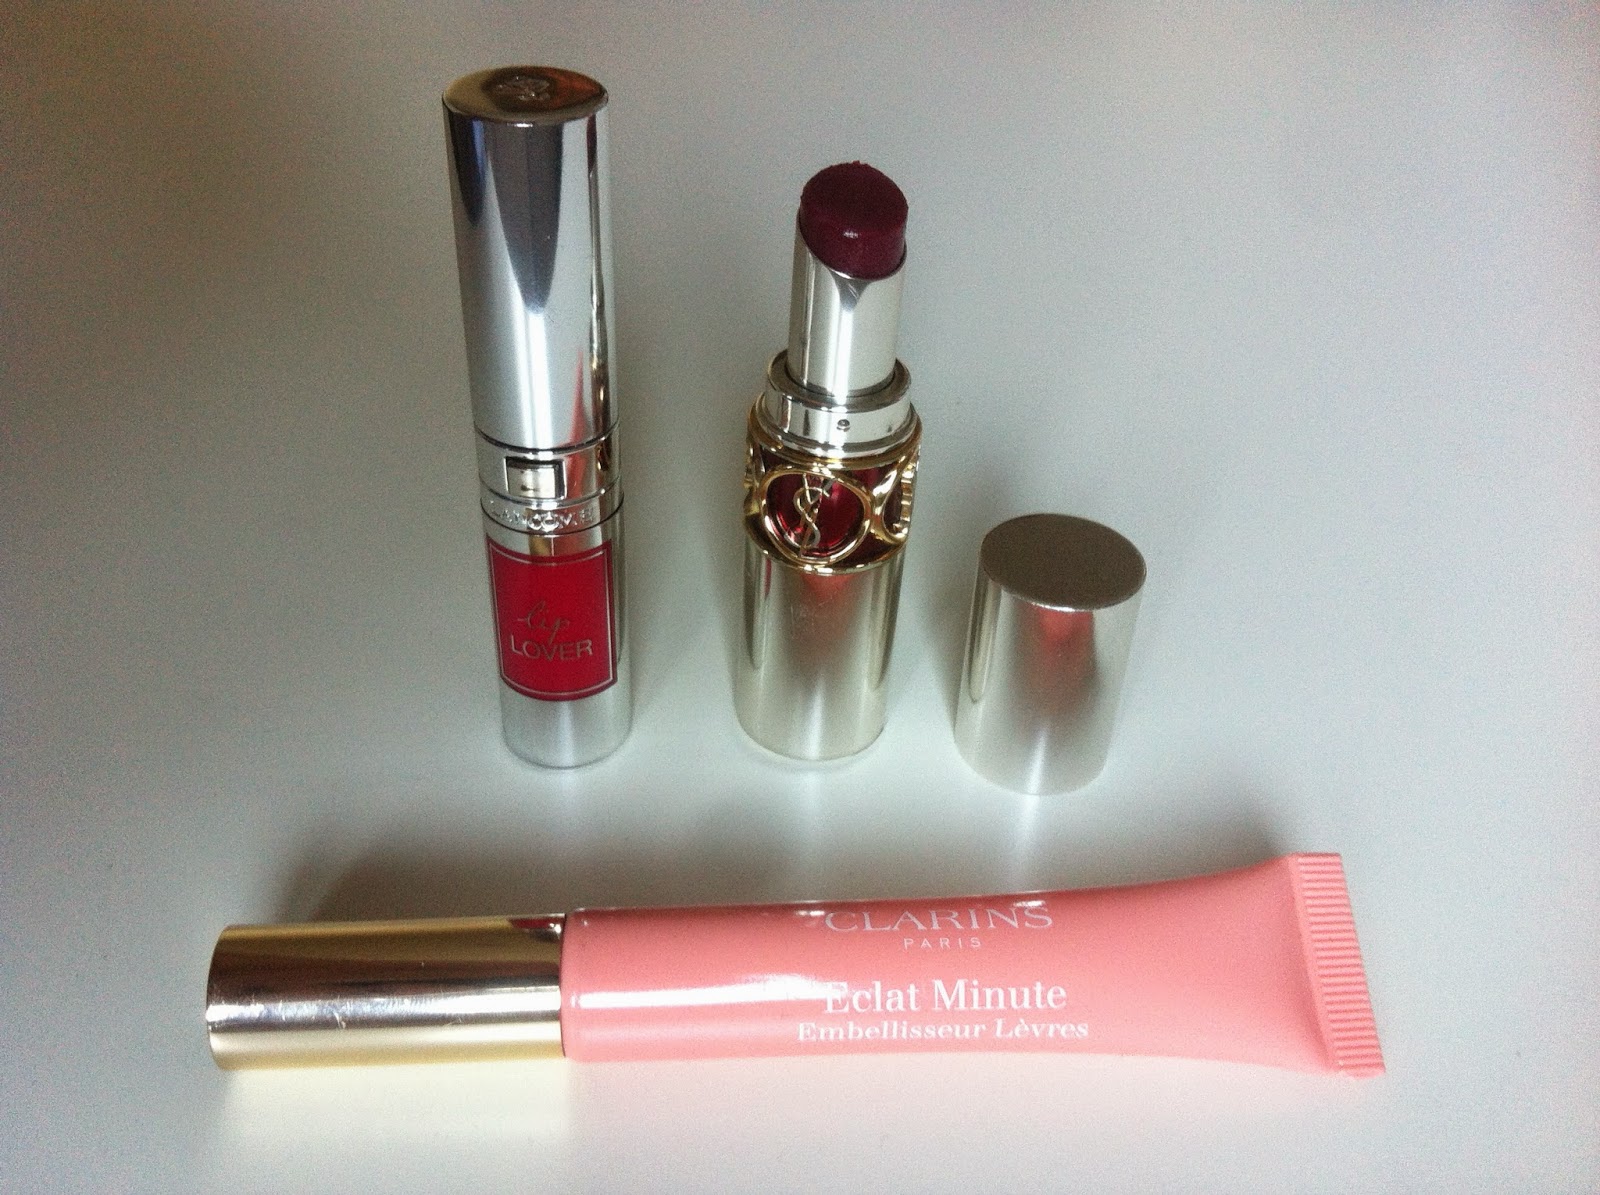 tag the lip product addict, lancome lip lover 355, ysl volupté sheer candy 5, clarins eclat minute embelliseur lèvres 02